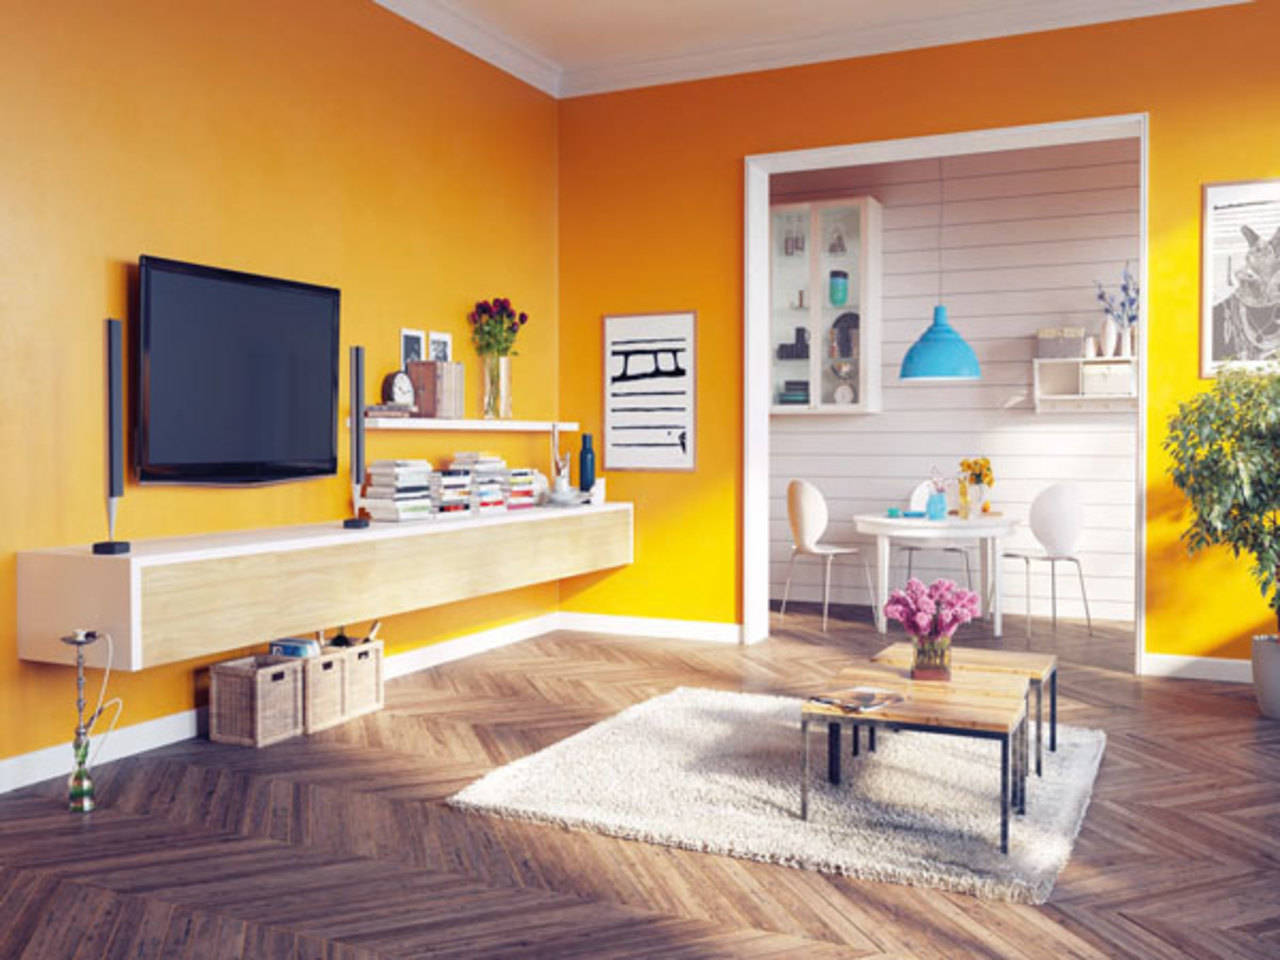 Home decor ideas to brighten up your home - Times of India